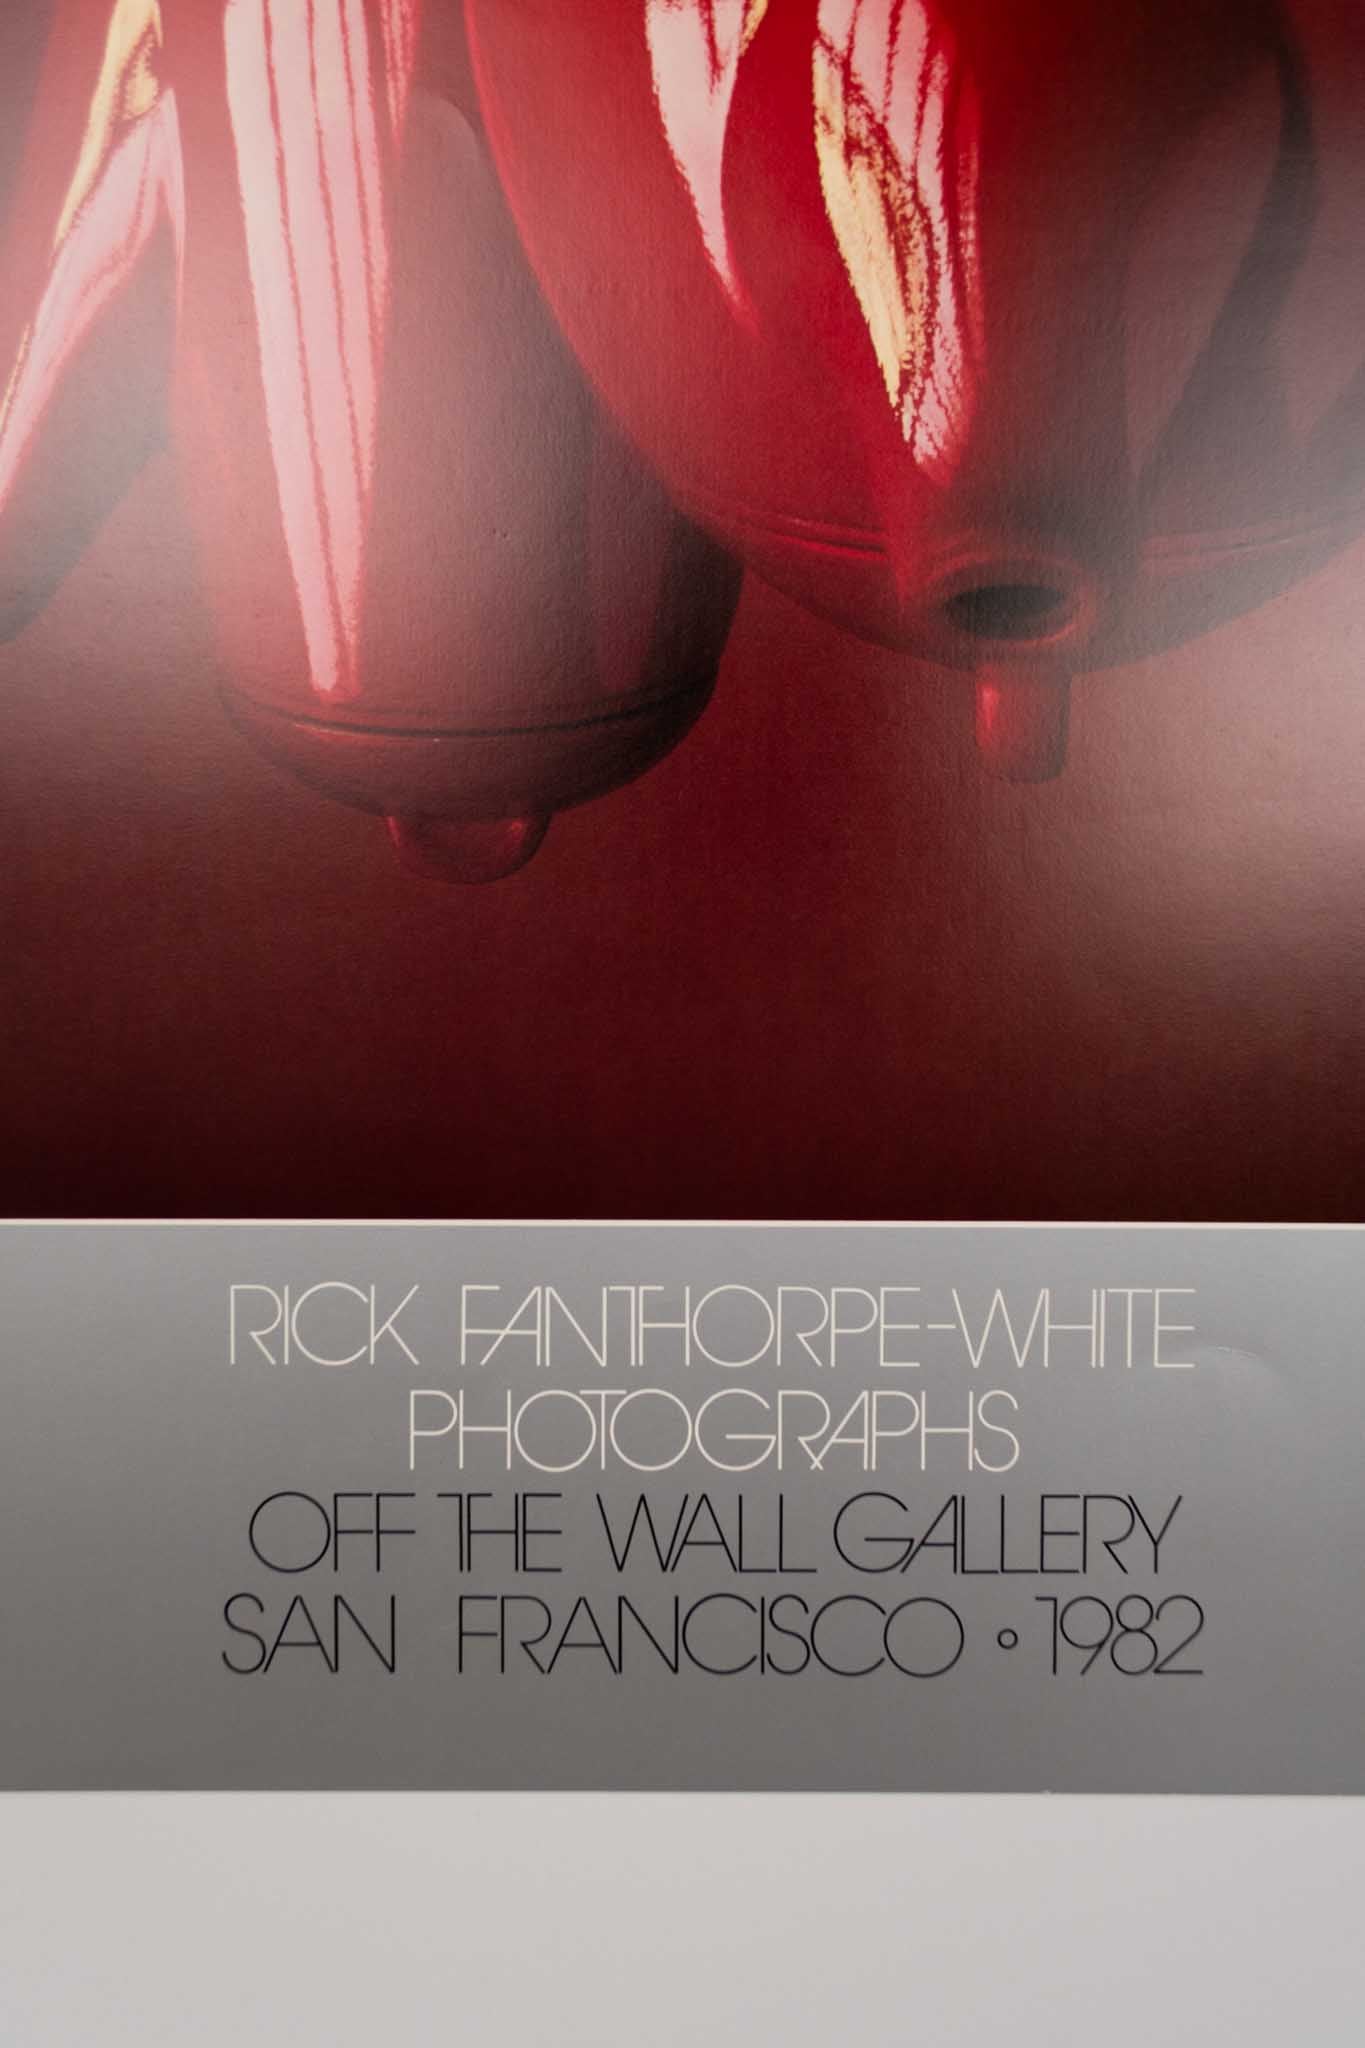 Rick Fanthorpe-White "Off The Wall Gallery" 1982 Print